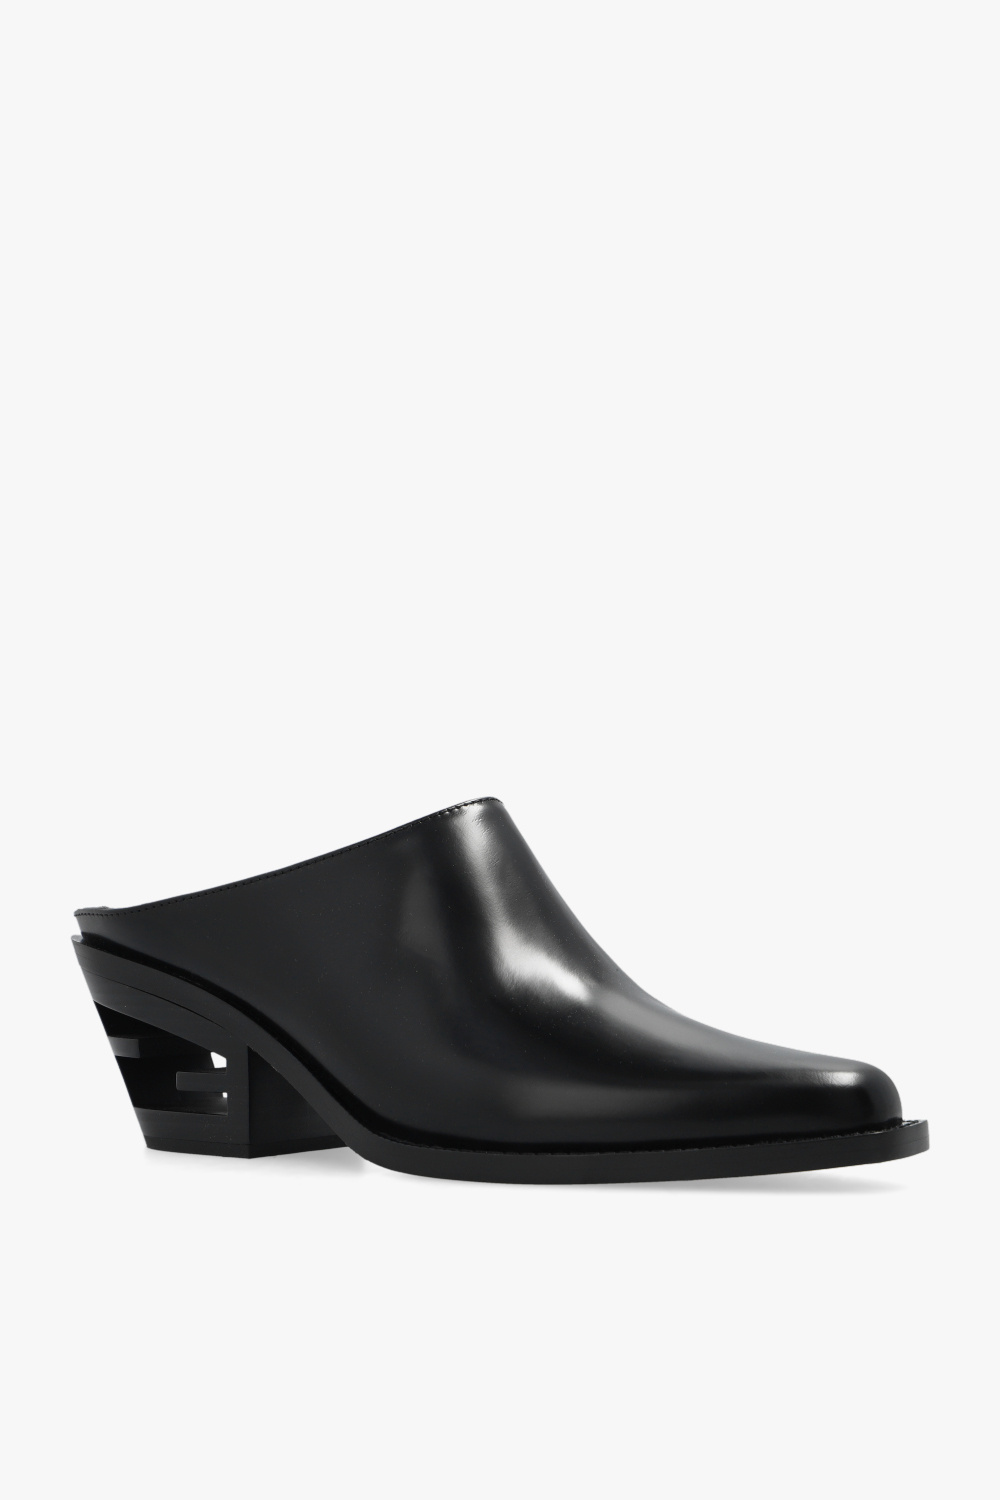 ALAIA 🇮🇹 WOMEN'S BLACK LEATHER AND FABRIC FASHION COMFORT MULES – Euro  Shoes Emporium